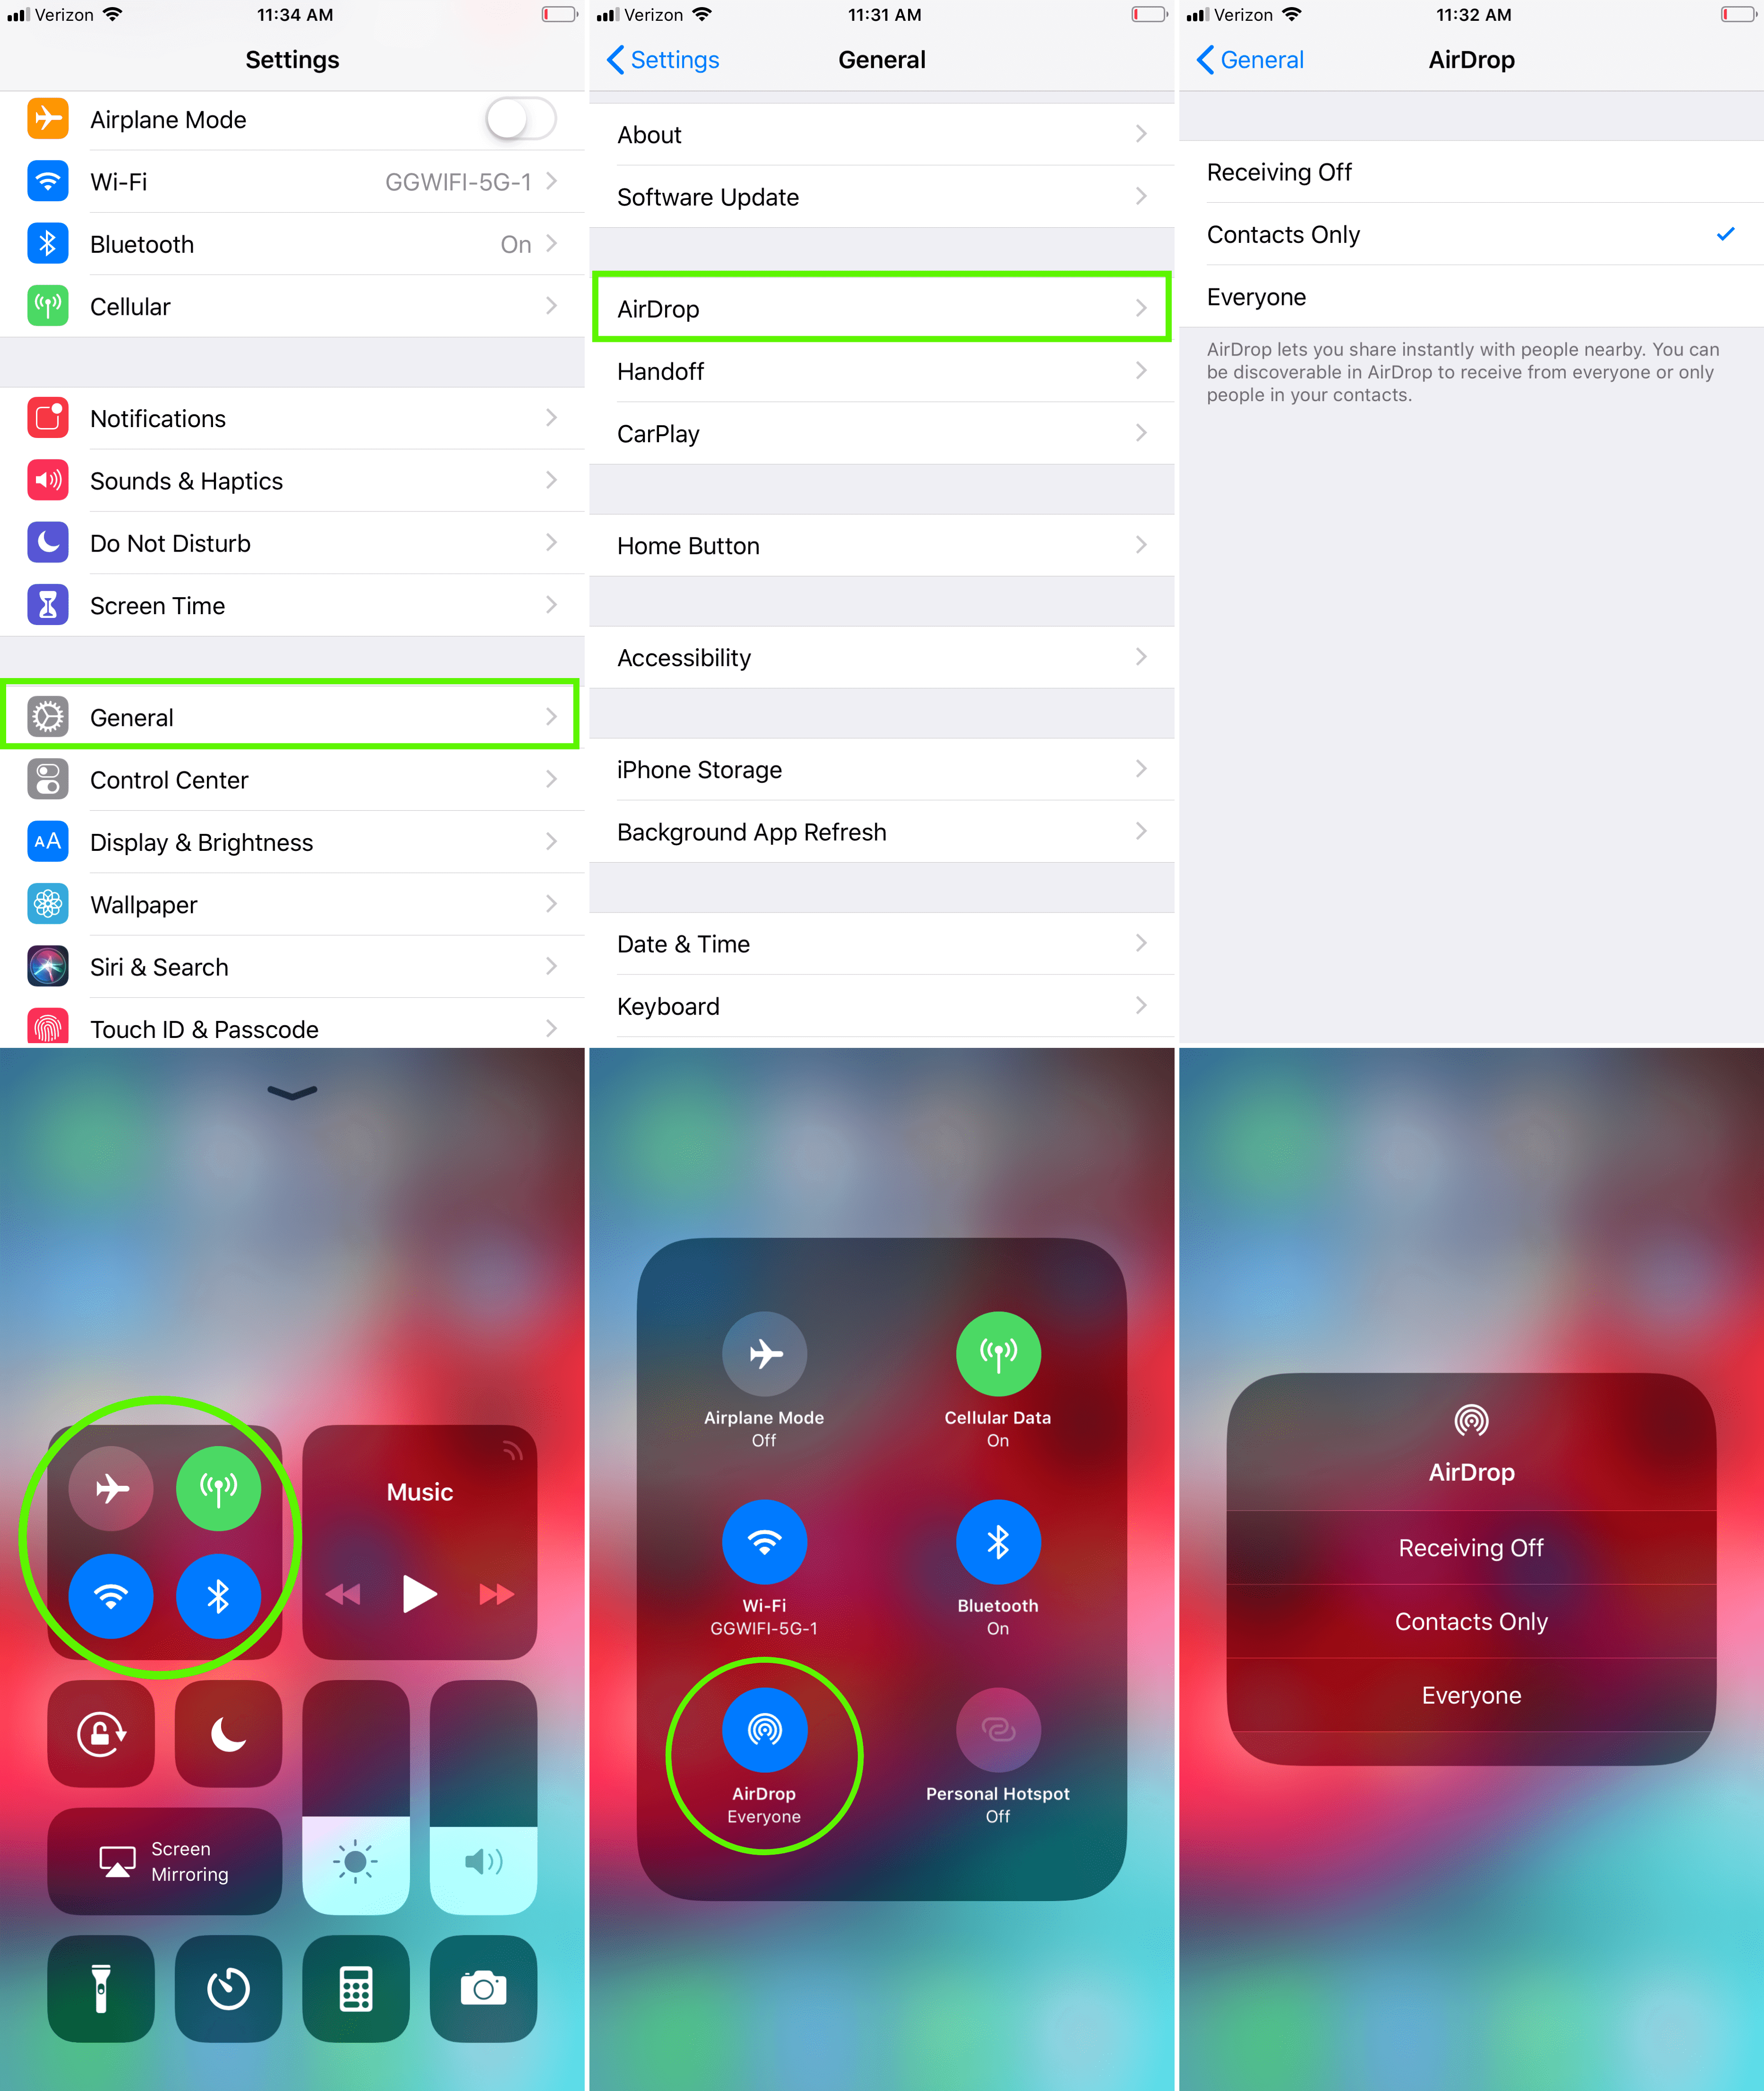 AirDrop not working - AirDrop settings iPhone